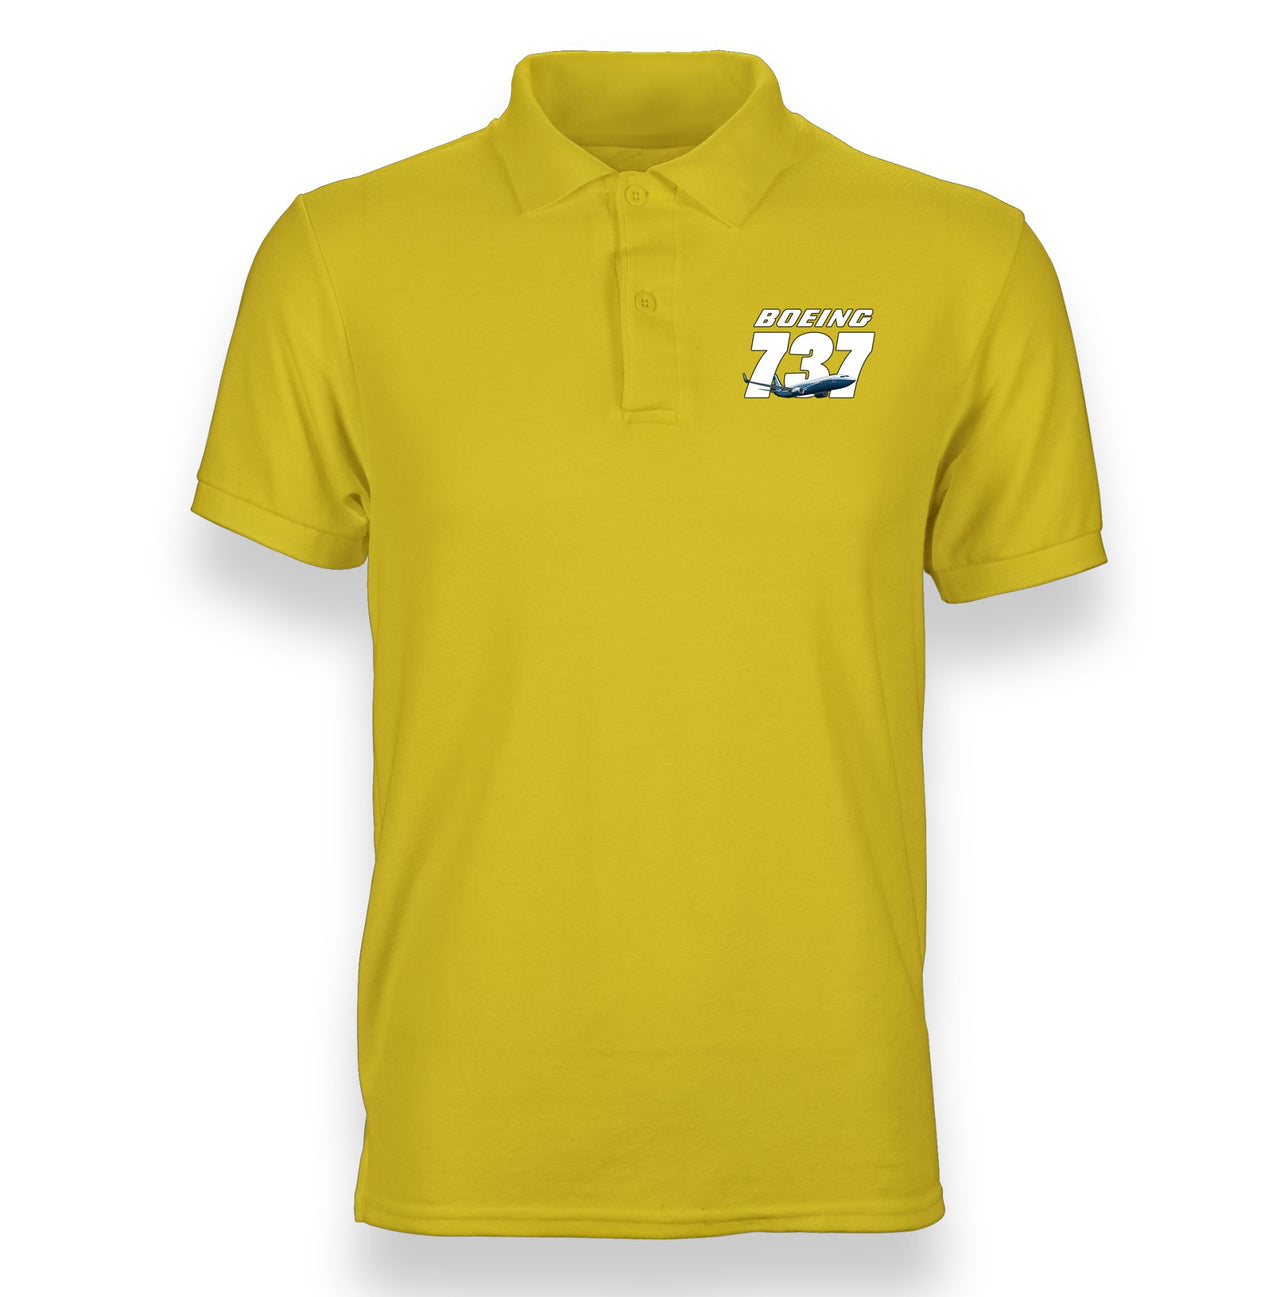 Super Boeing 737+Text Designed "WOMEN" Polo T-Shirts